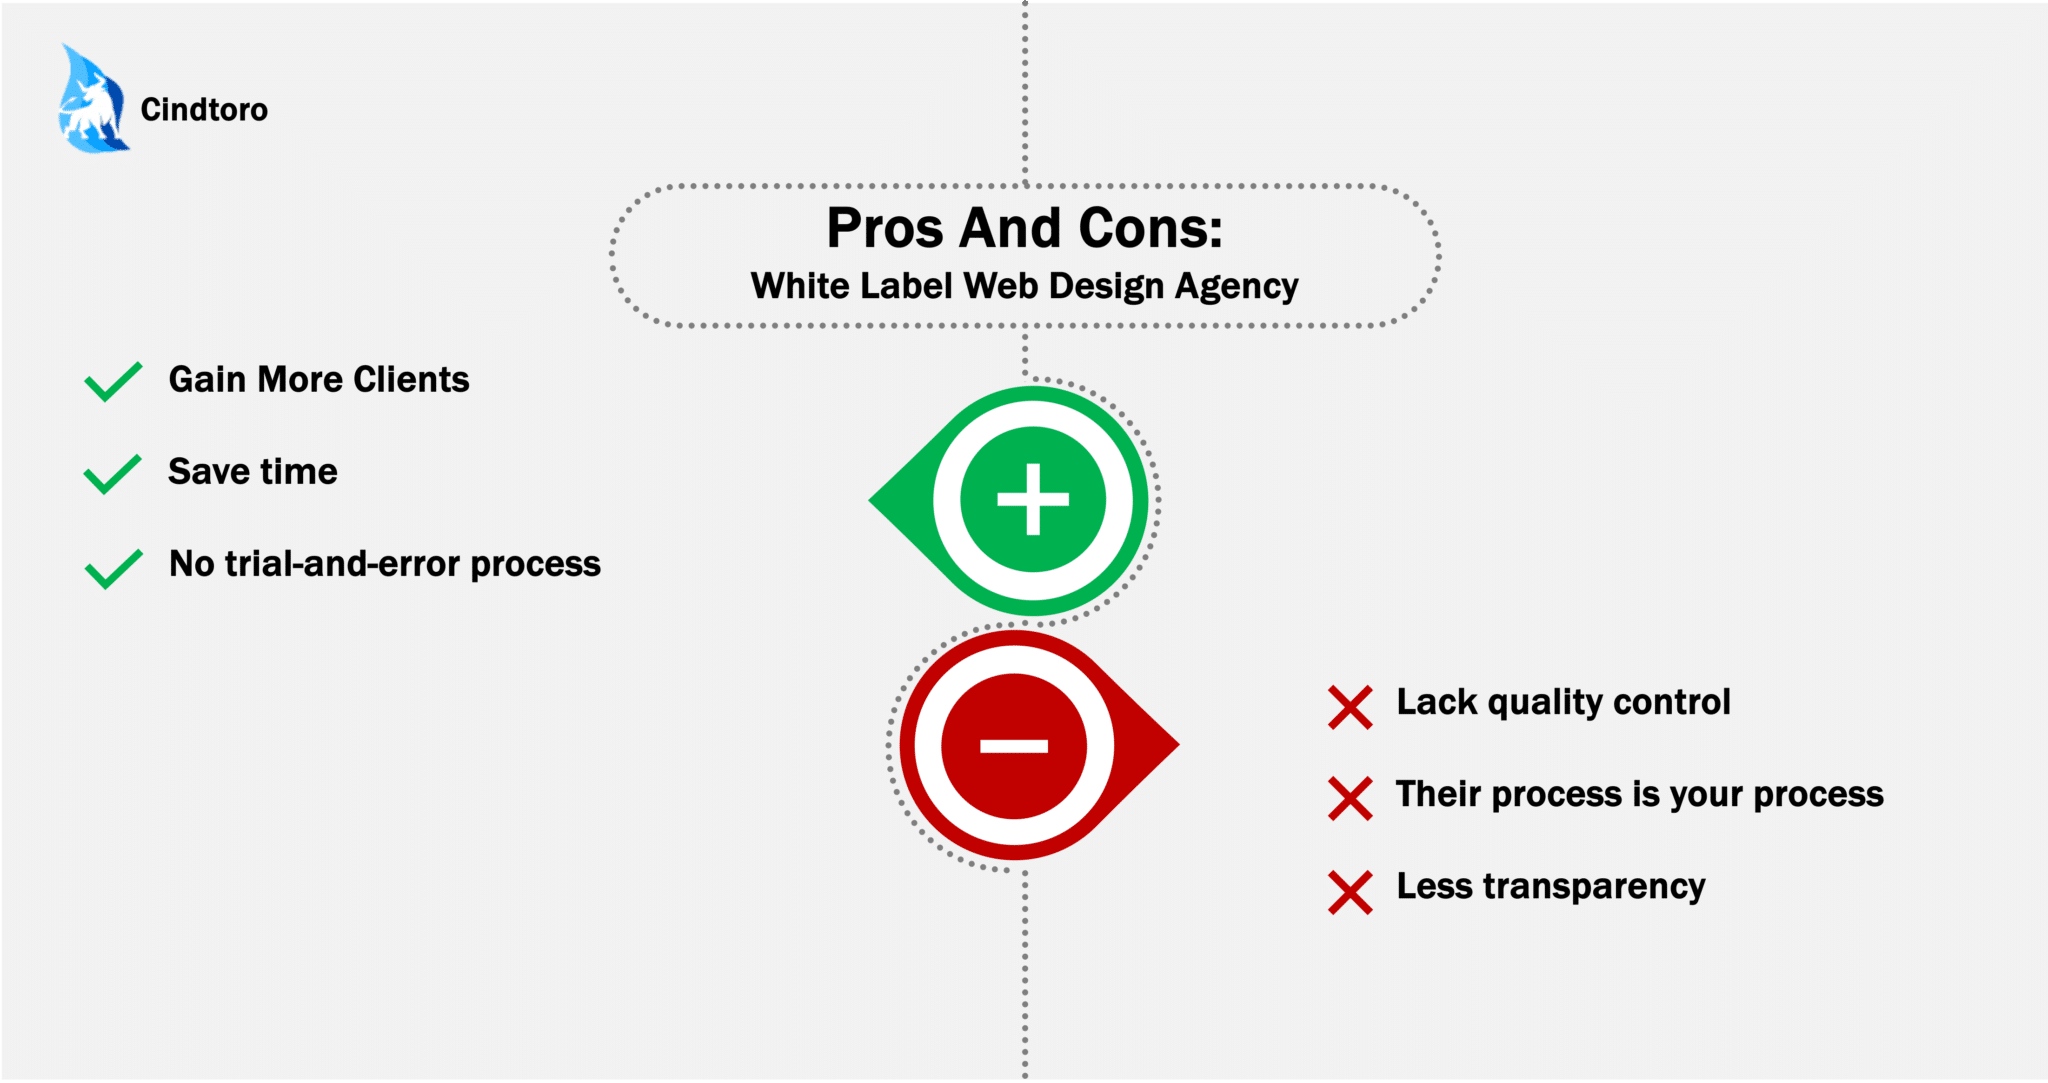 White Label Web Design Agency The Pros And Cons